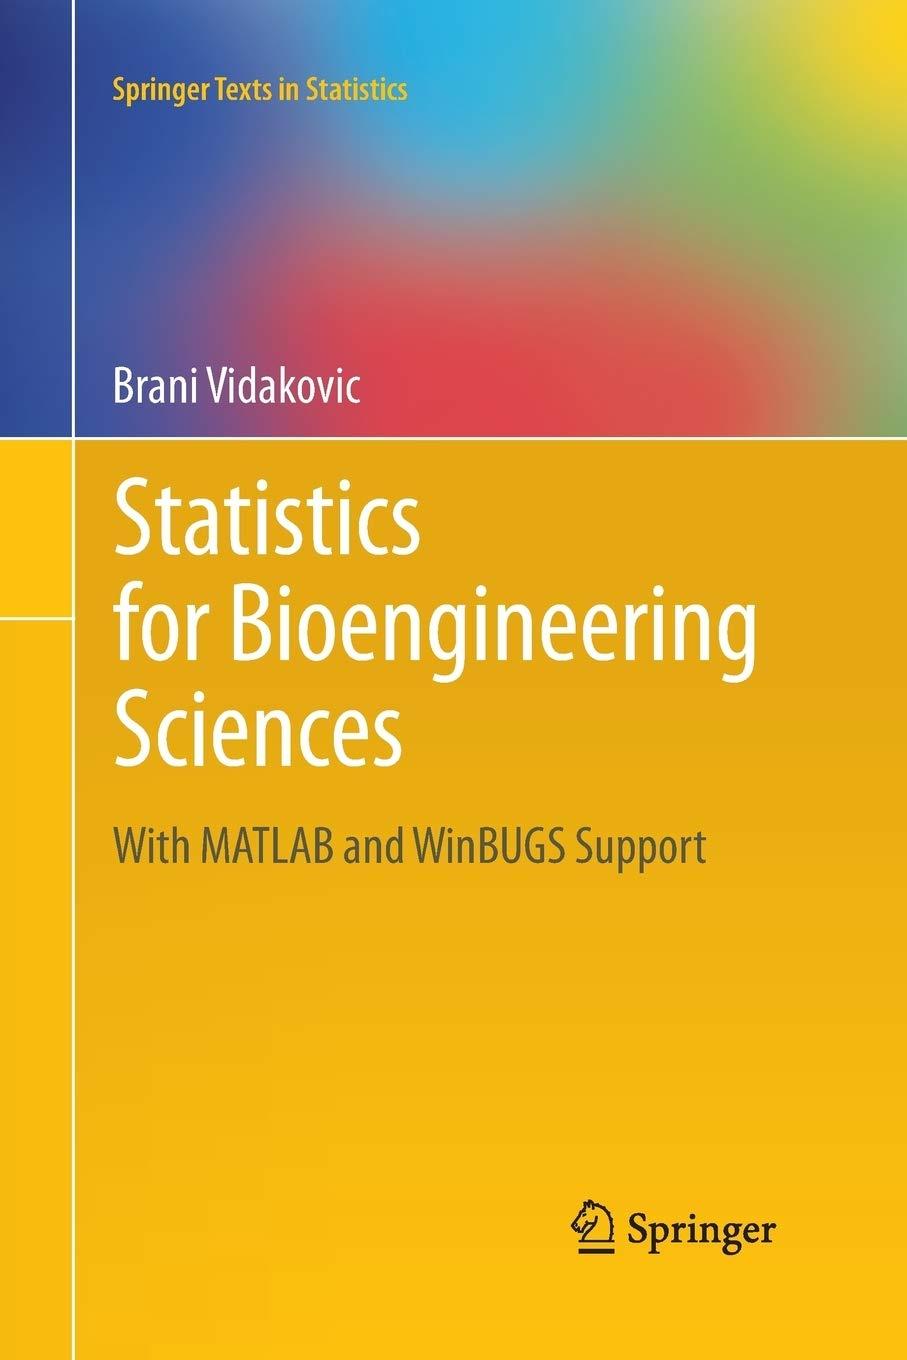 Statistics For Bioengineering Sciences With MATLAB And WinBUGS Support